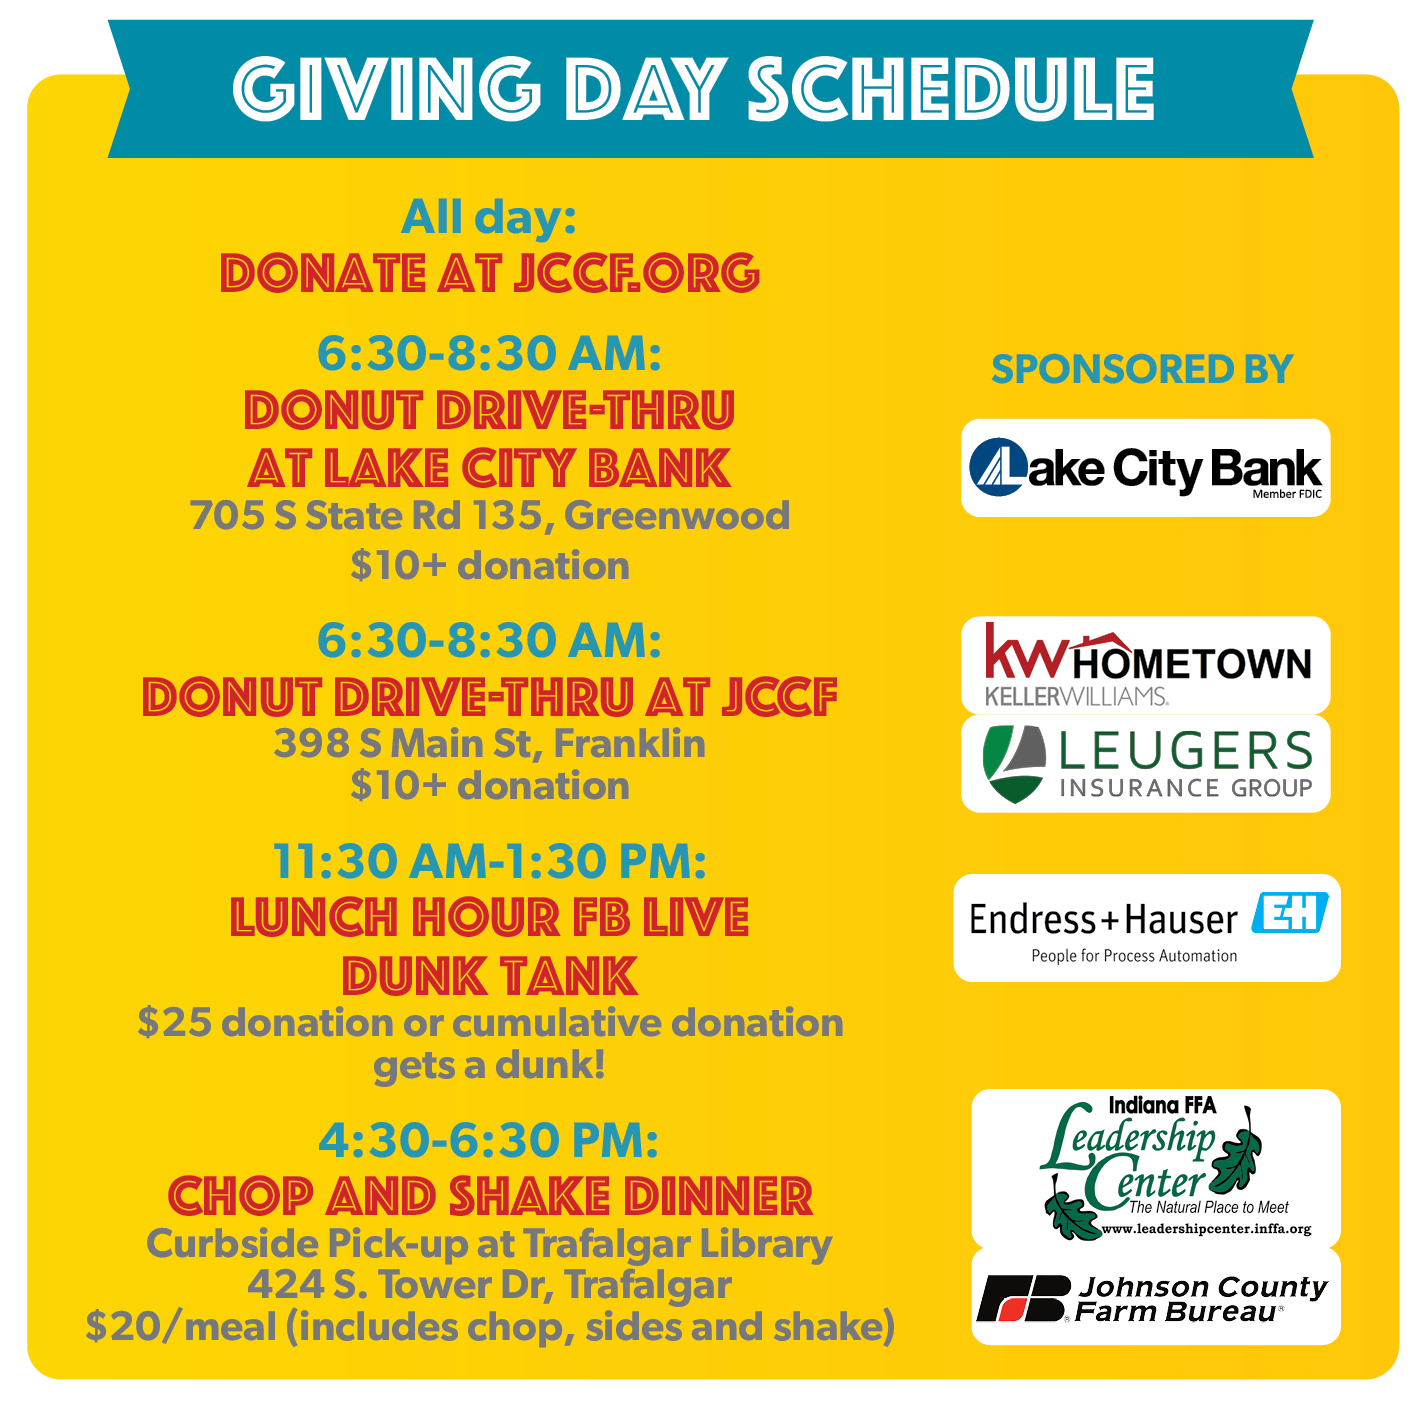 Giving Day 2020 schedule